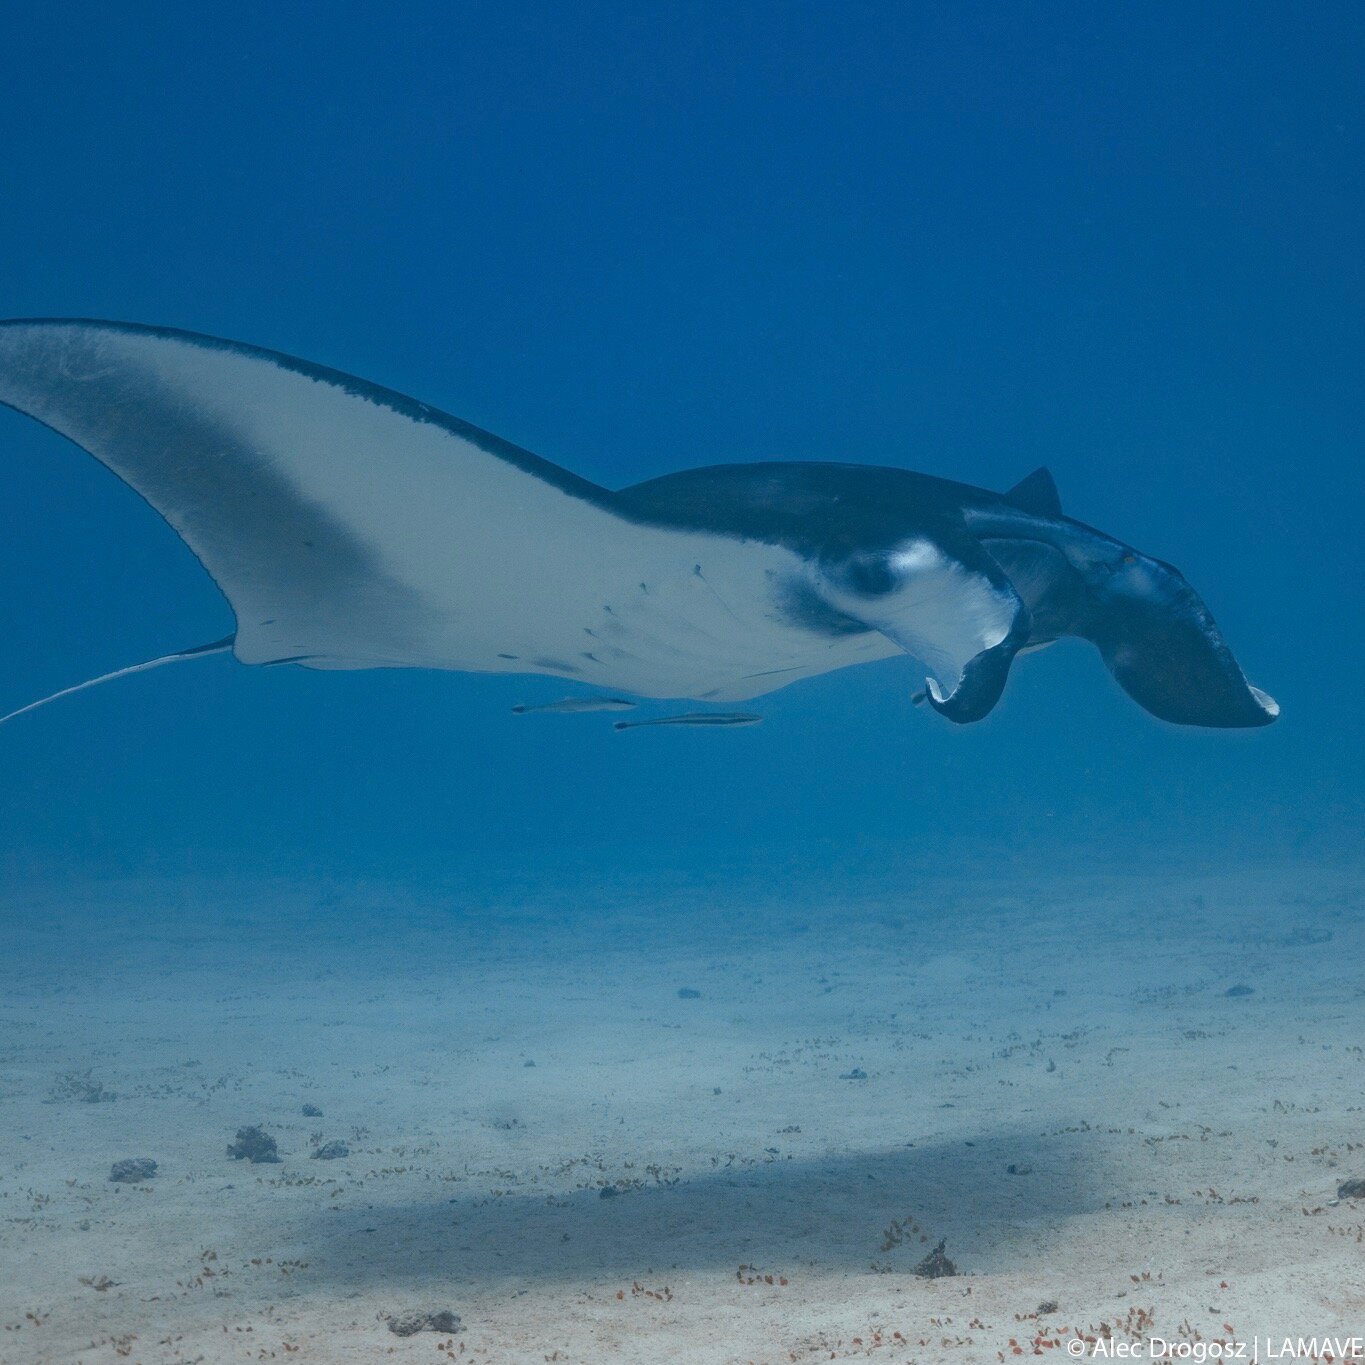 We are looking for volunteers to join our Manta Ray Research &amp; Conservation project. Gain valuable experience in marine science, working with a reputable research institute studying manta rays in the Philippines.

You will work closely with #LAMA